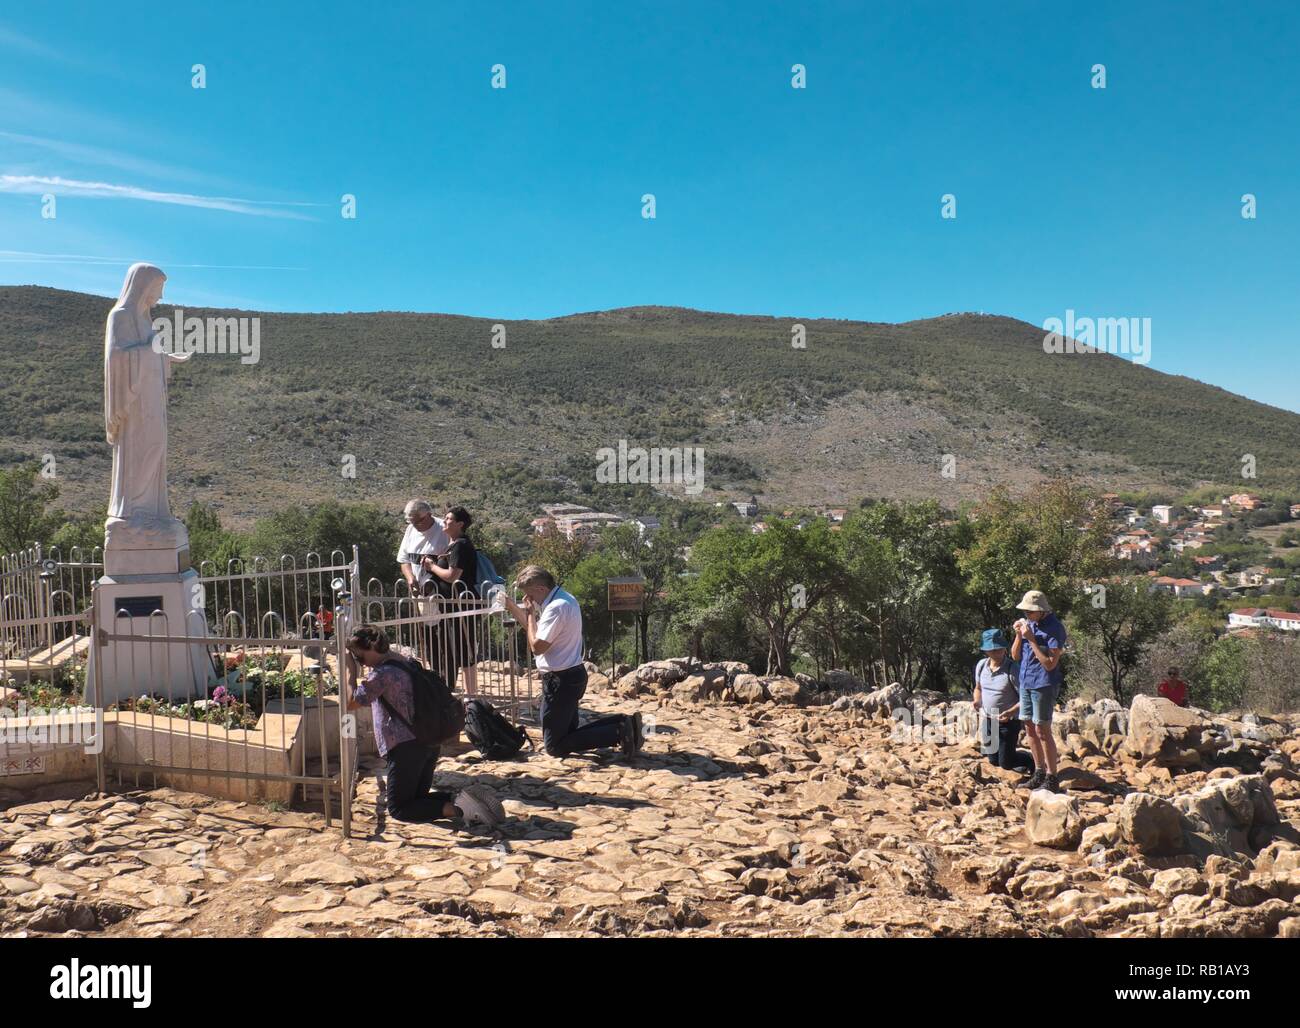 View of the Virgin Mary on Apparition Hill in Bosnia & Herzegovina  during a bright summer day showing lots of people praying Stock Photo